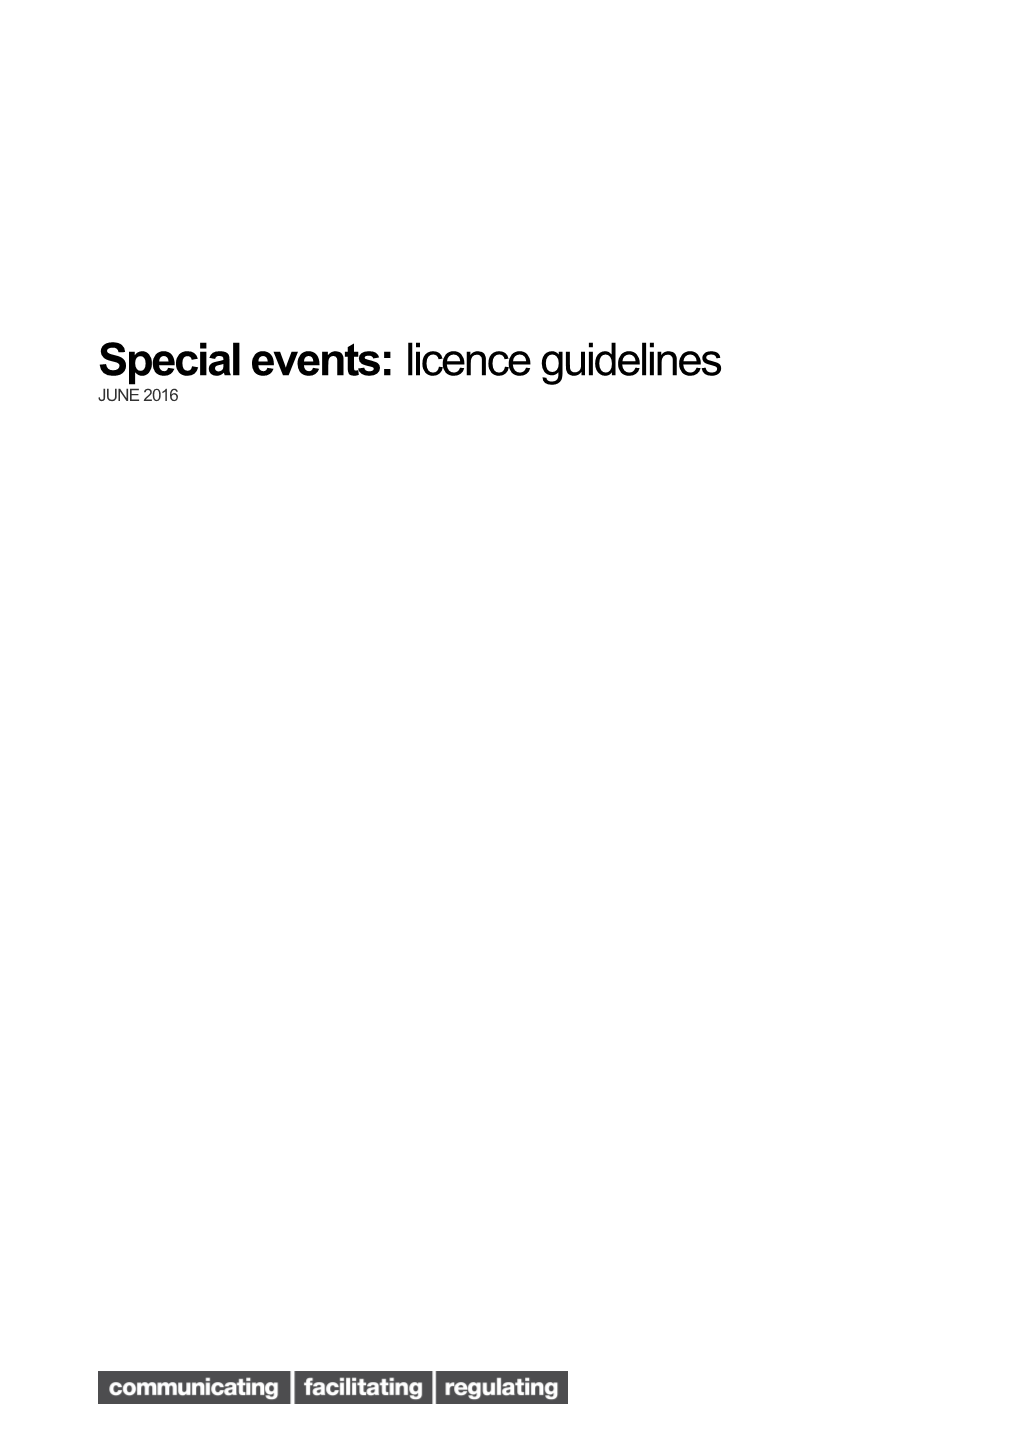 Special Events: Licenceguidelines